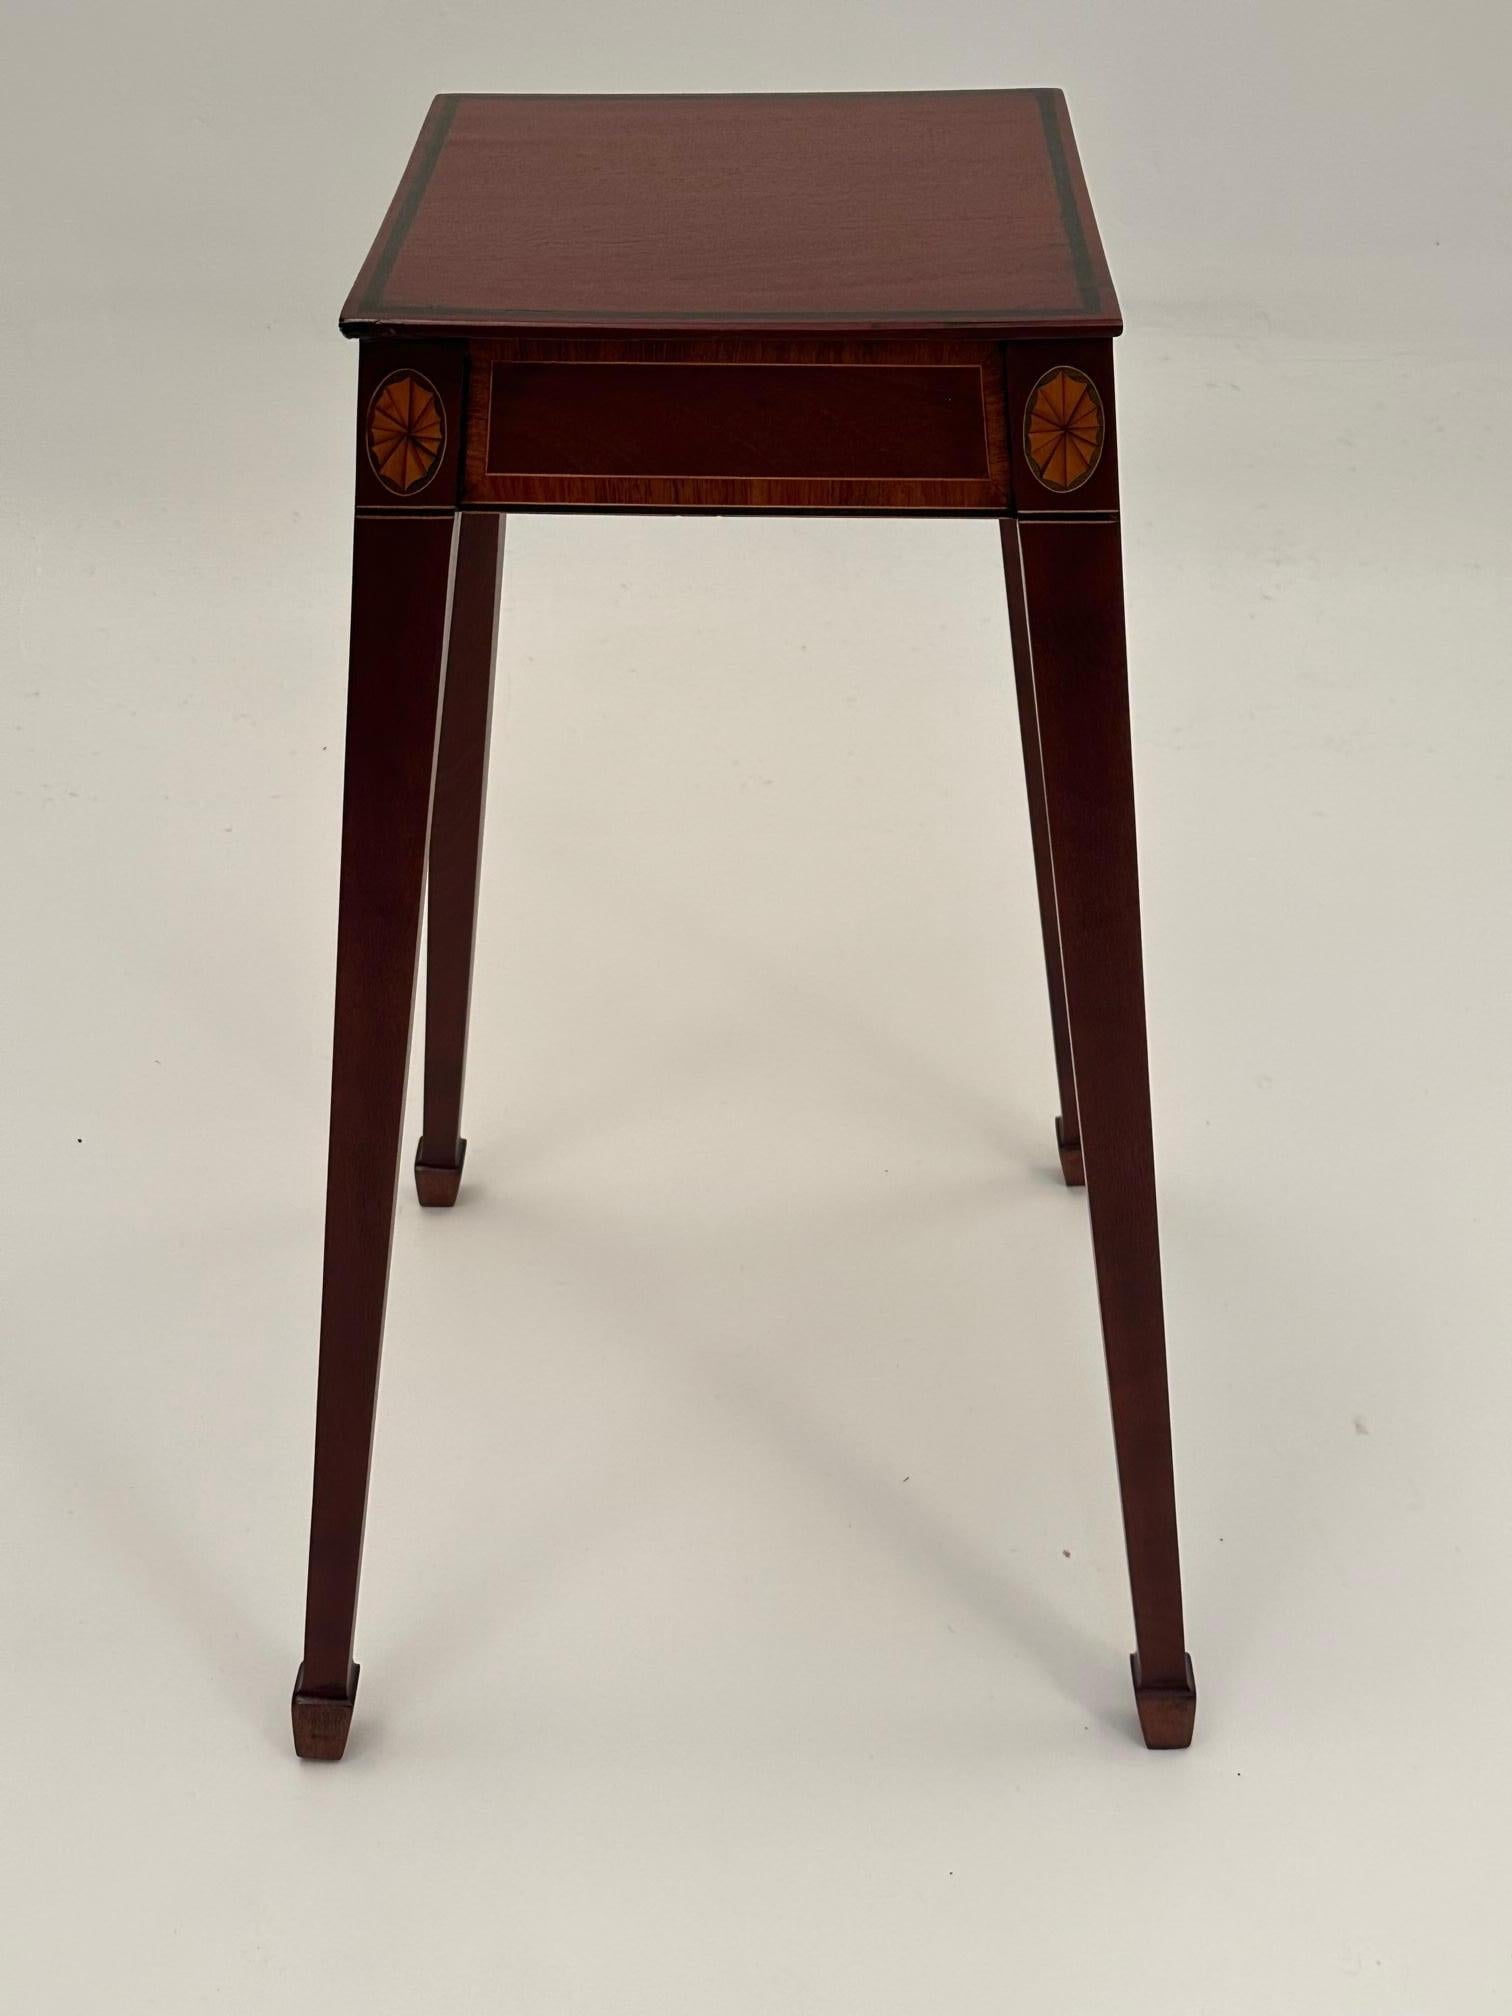 Early 20th Century English Vintage Mahogany & Satinwood Stand End Table with Candle Slide For Sale